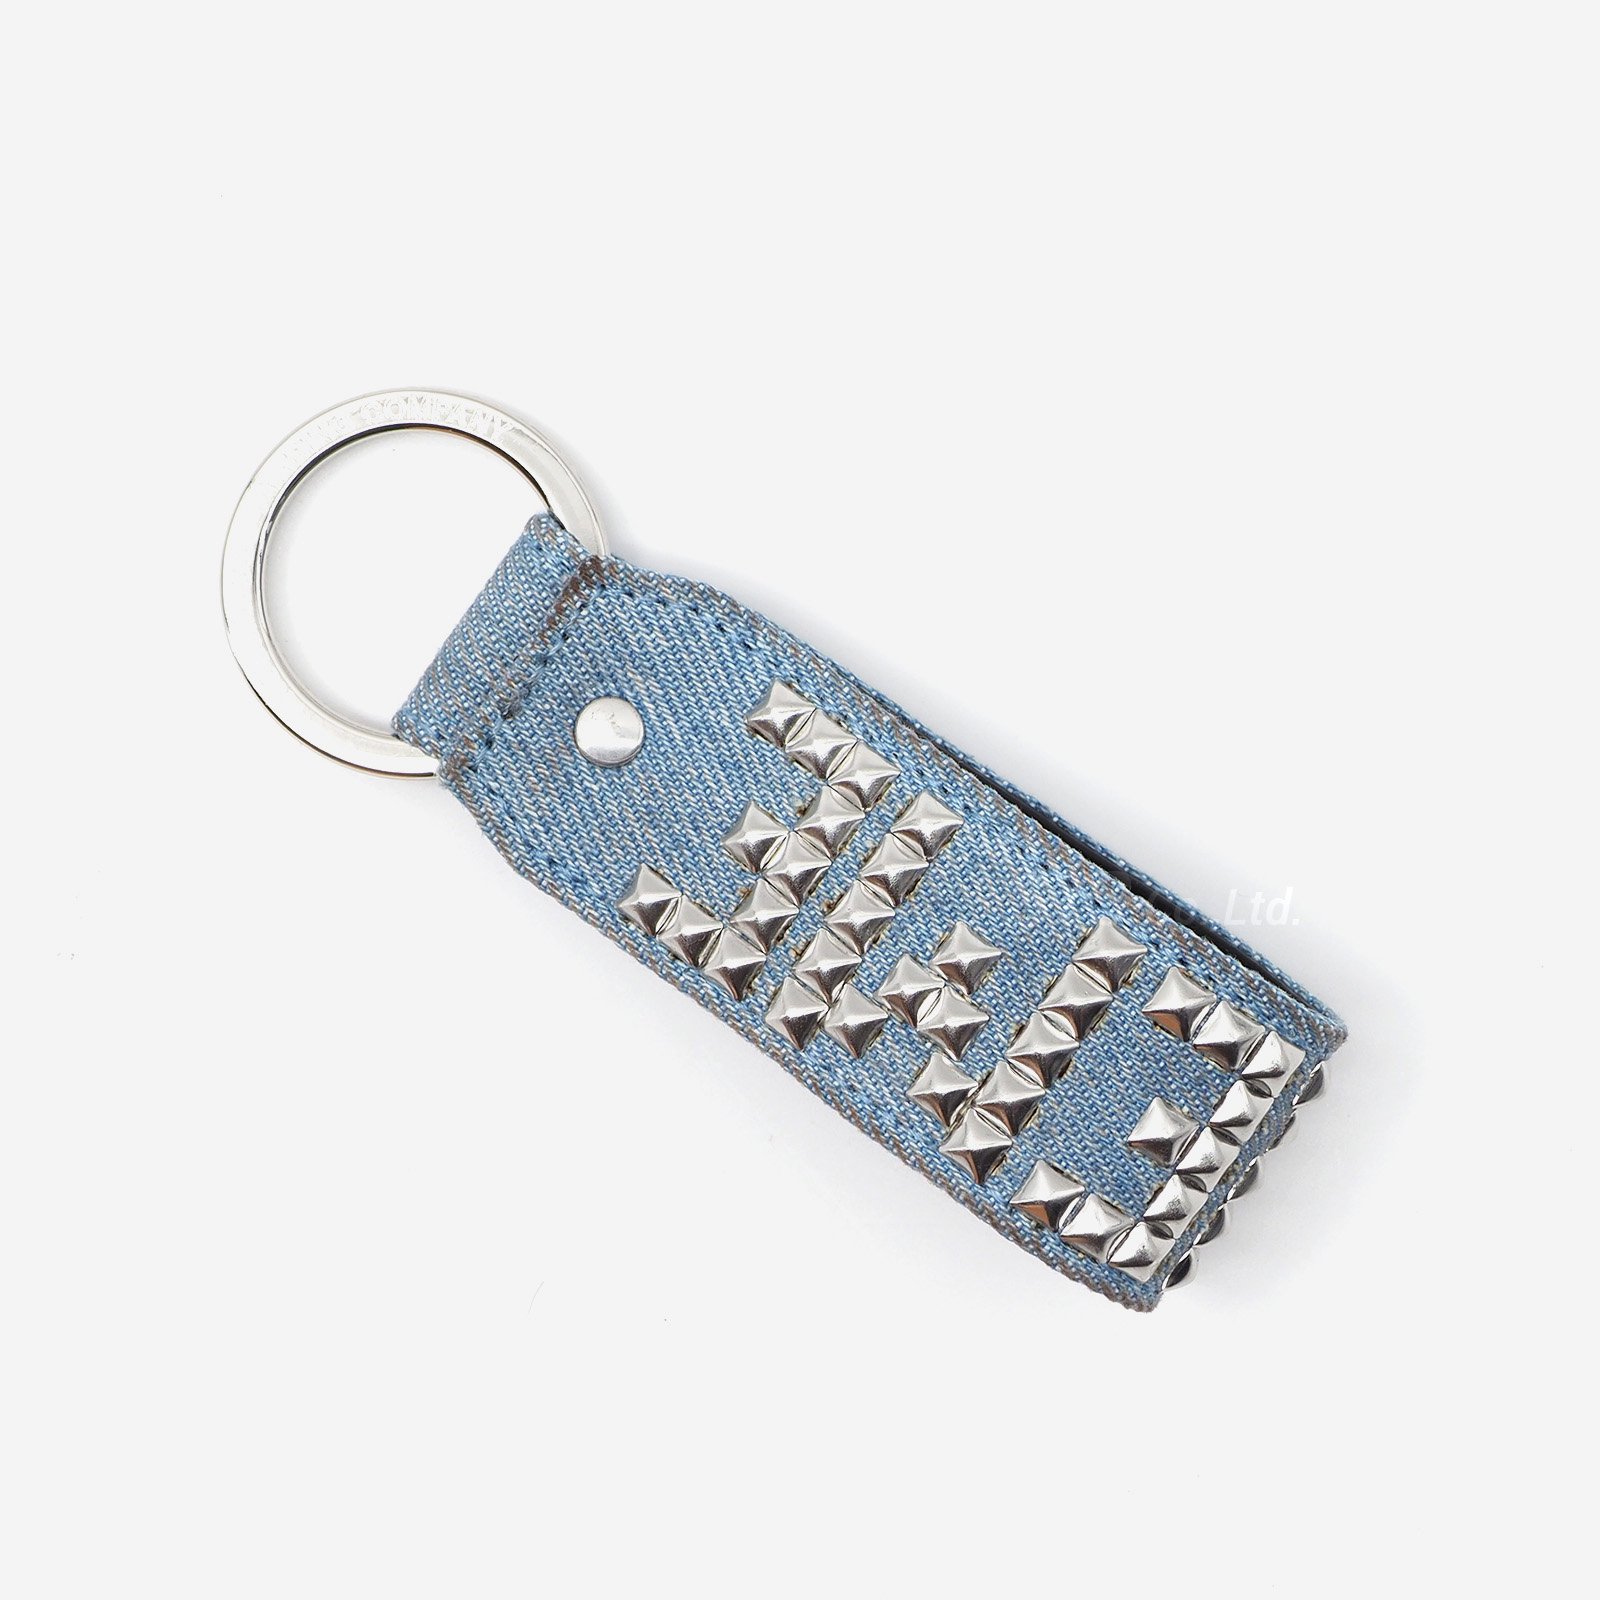 Supreme/Hollywood Trading Company Studded Keychain - ParkSIDER